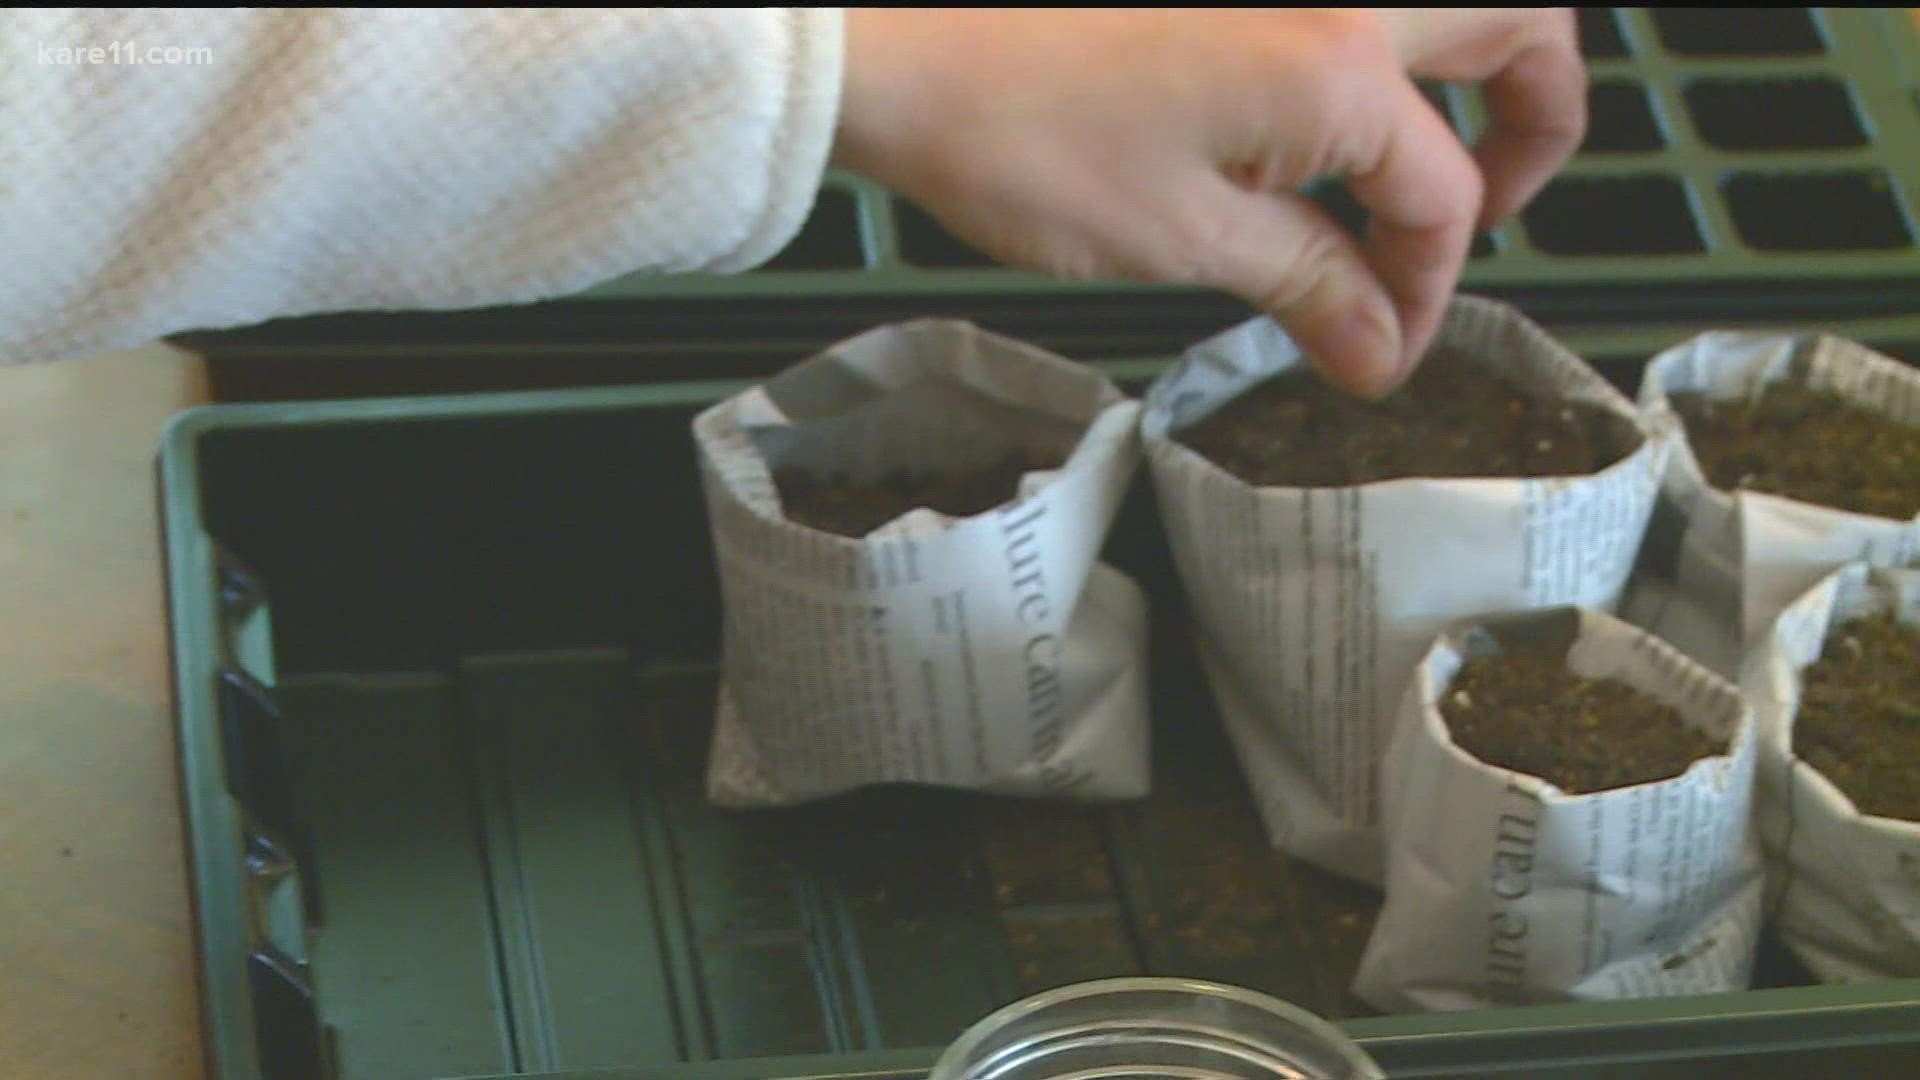 No need to buy the black plastic trays for seed starting — make your own from newspaper!